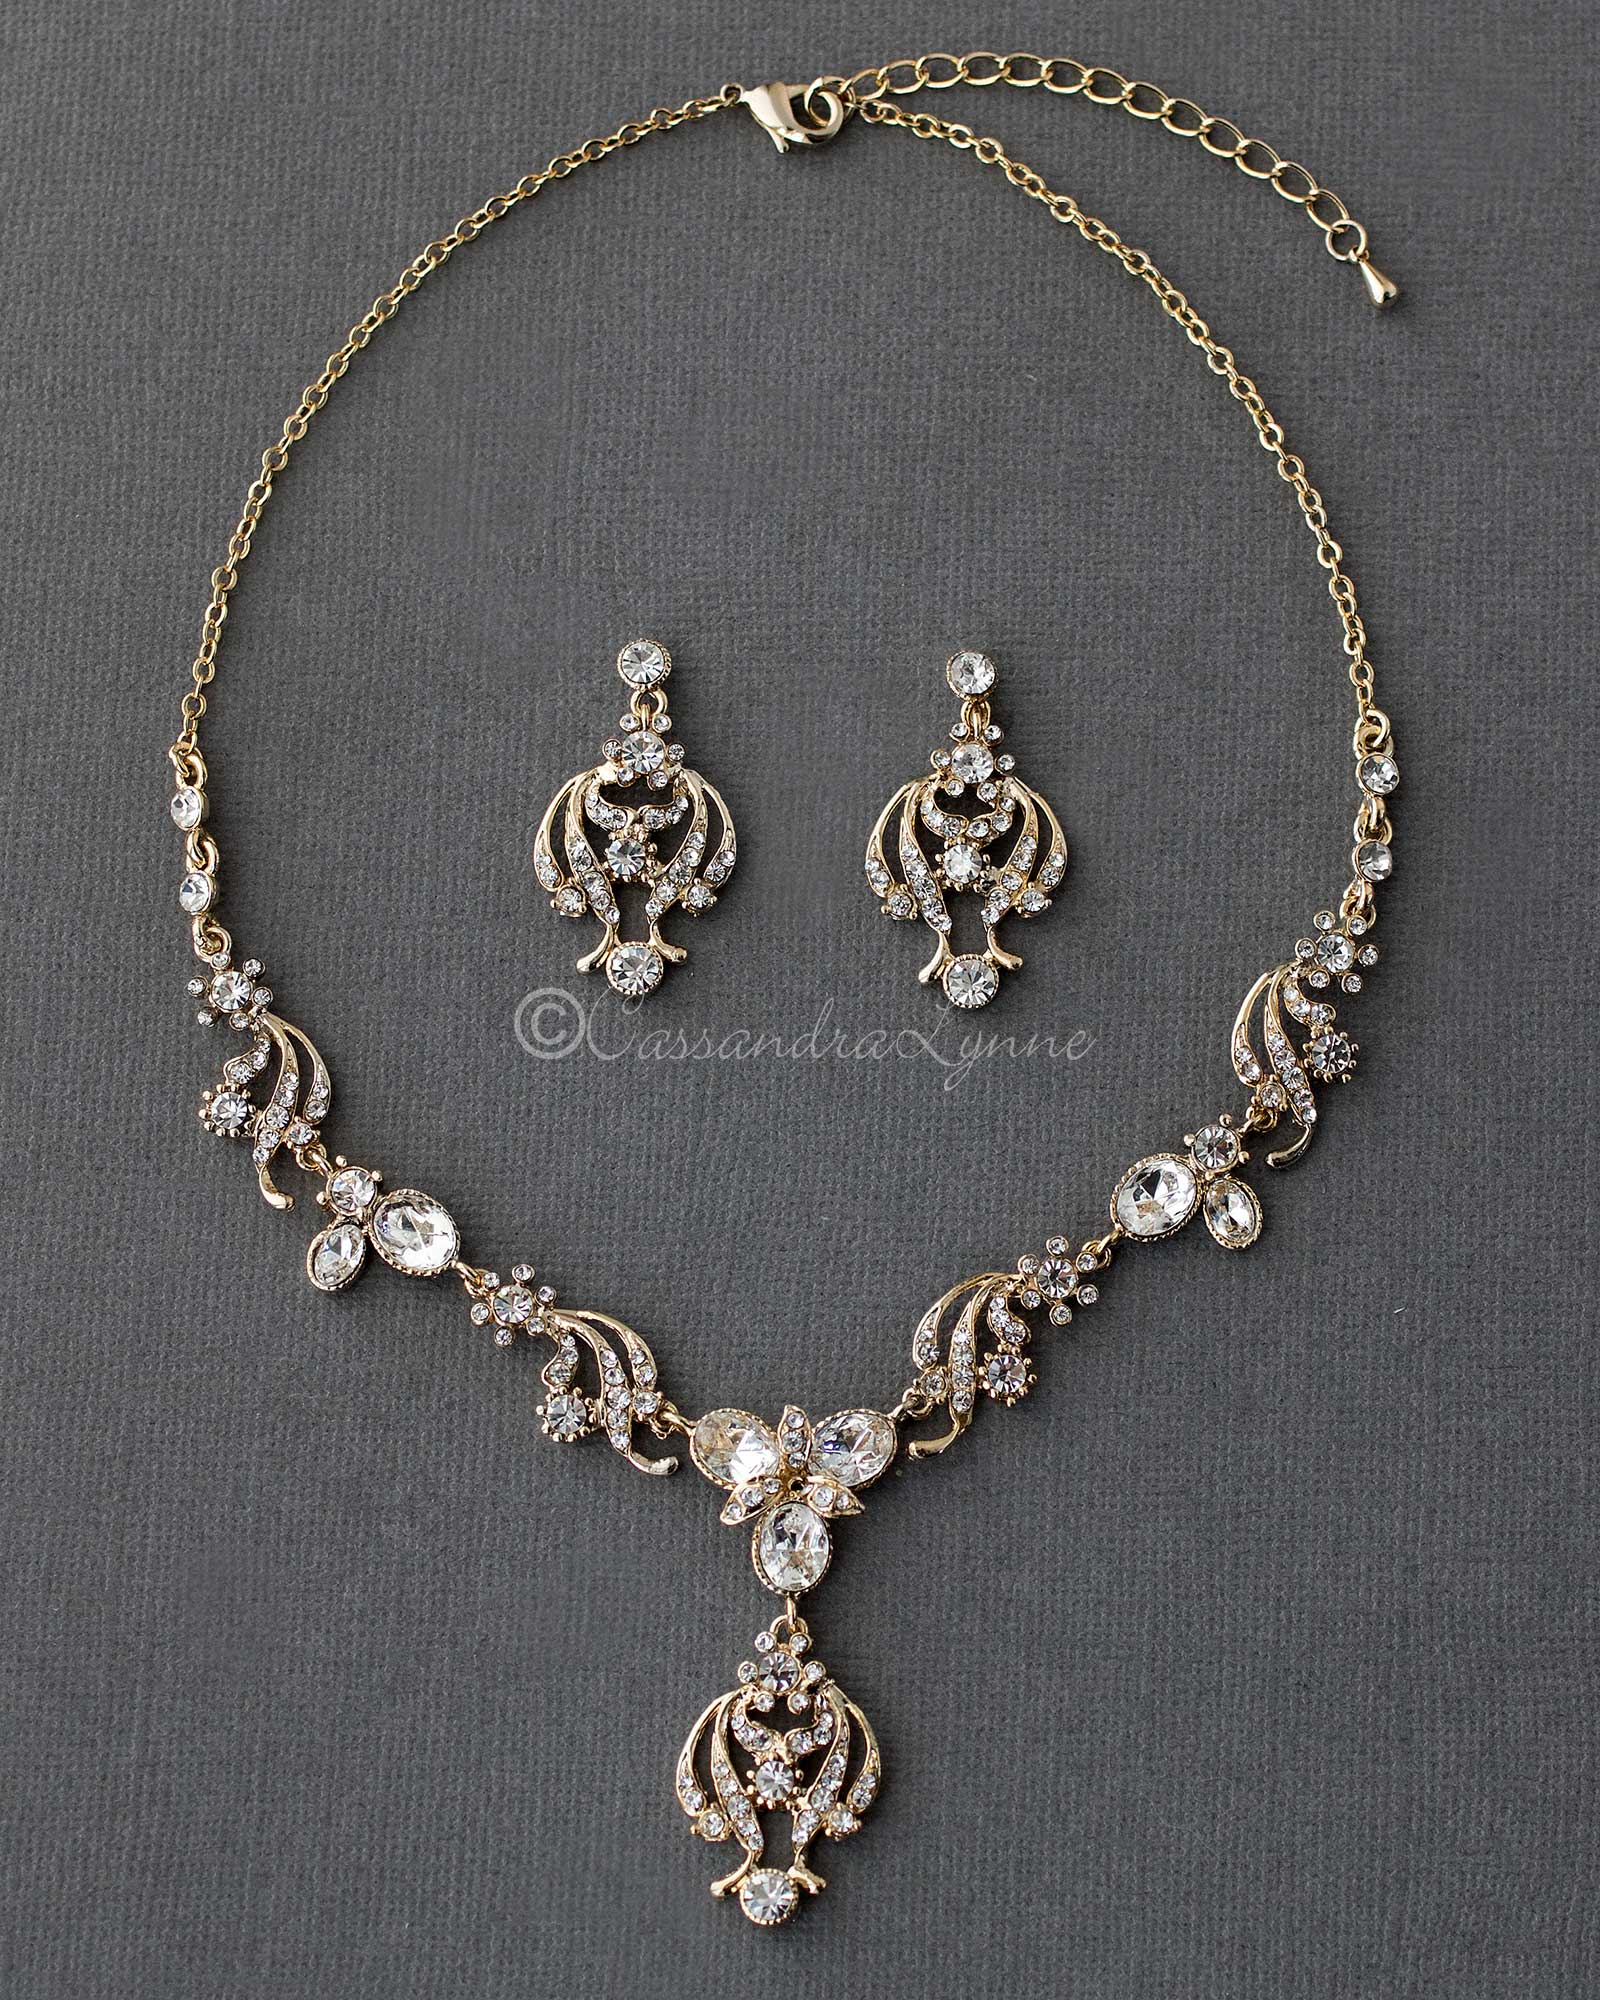 Gold Oval Crystal Necklace Set with Chandelier Drop - Cassandra Lynne